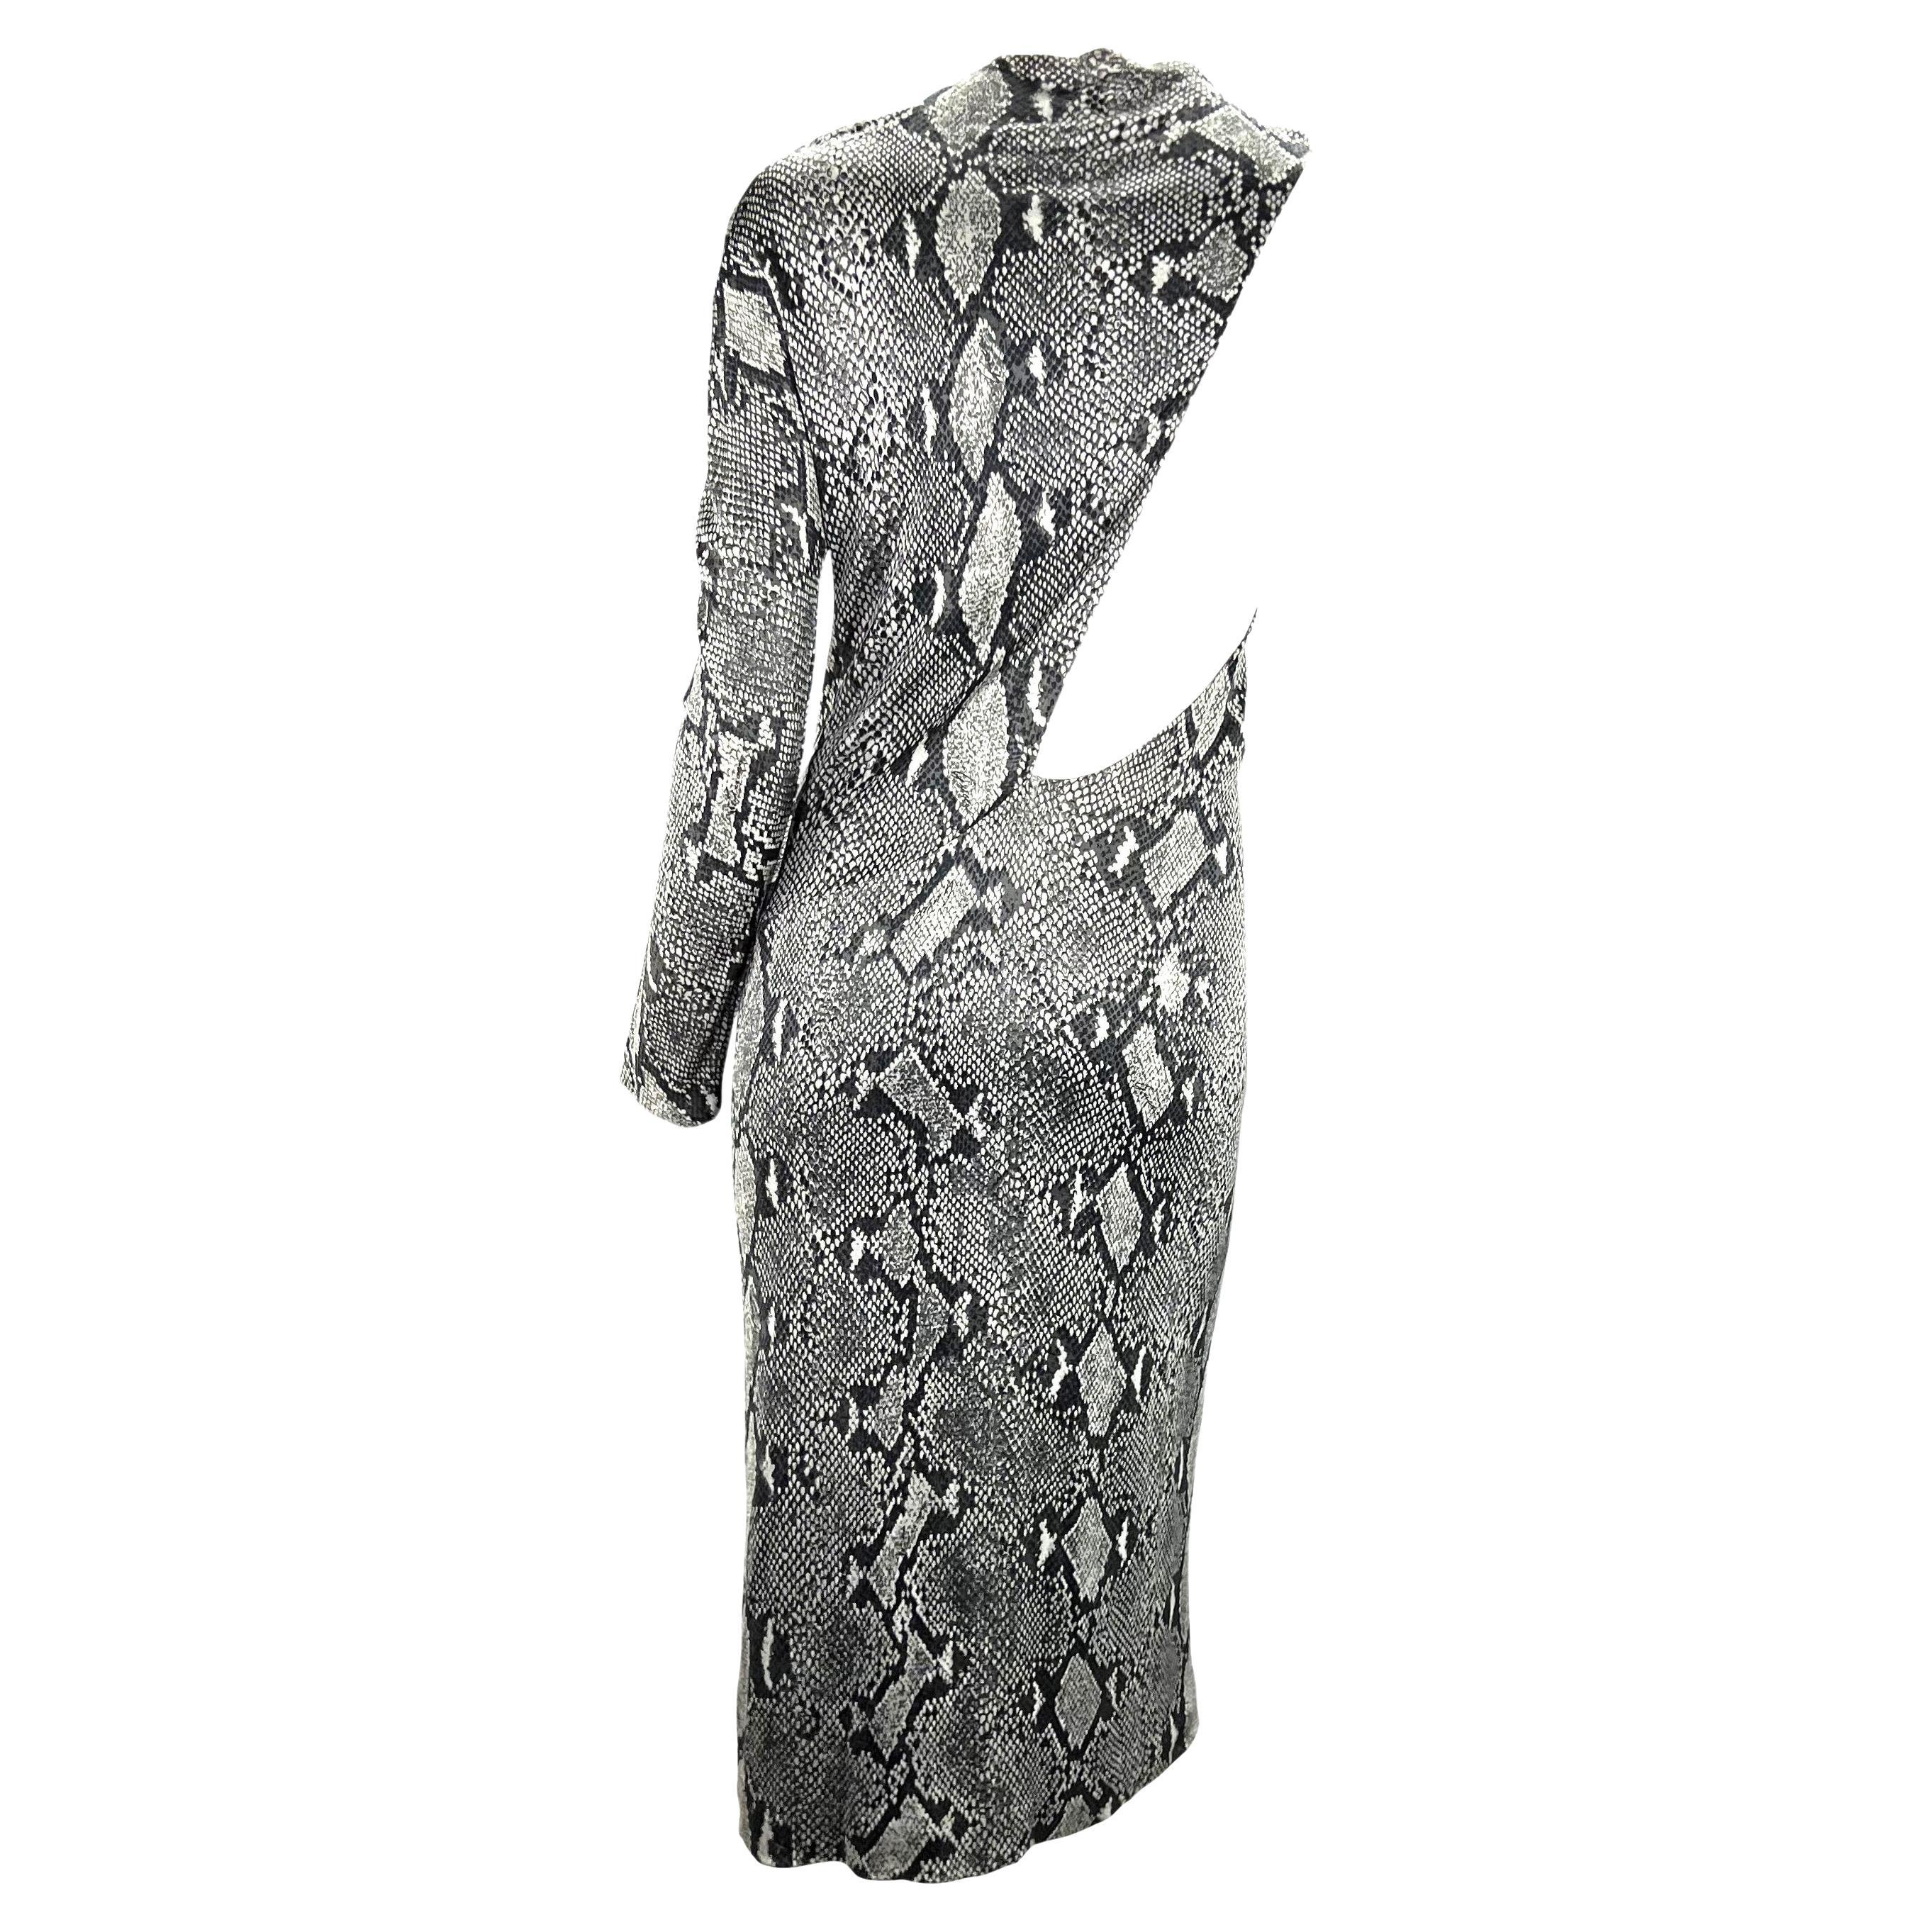 S/S 2000 Gucci by Tom Ford Grey Snake Print Asymmetric One Sleeve Dress For Sale 3